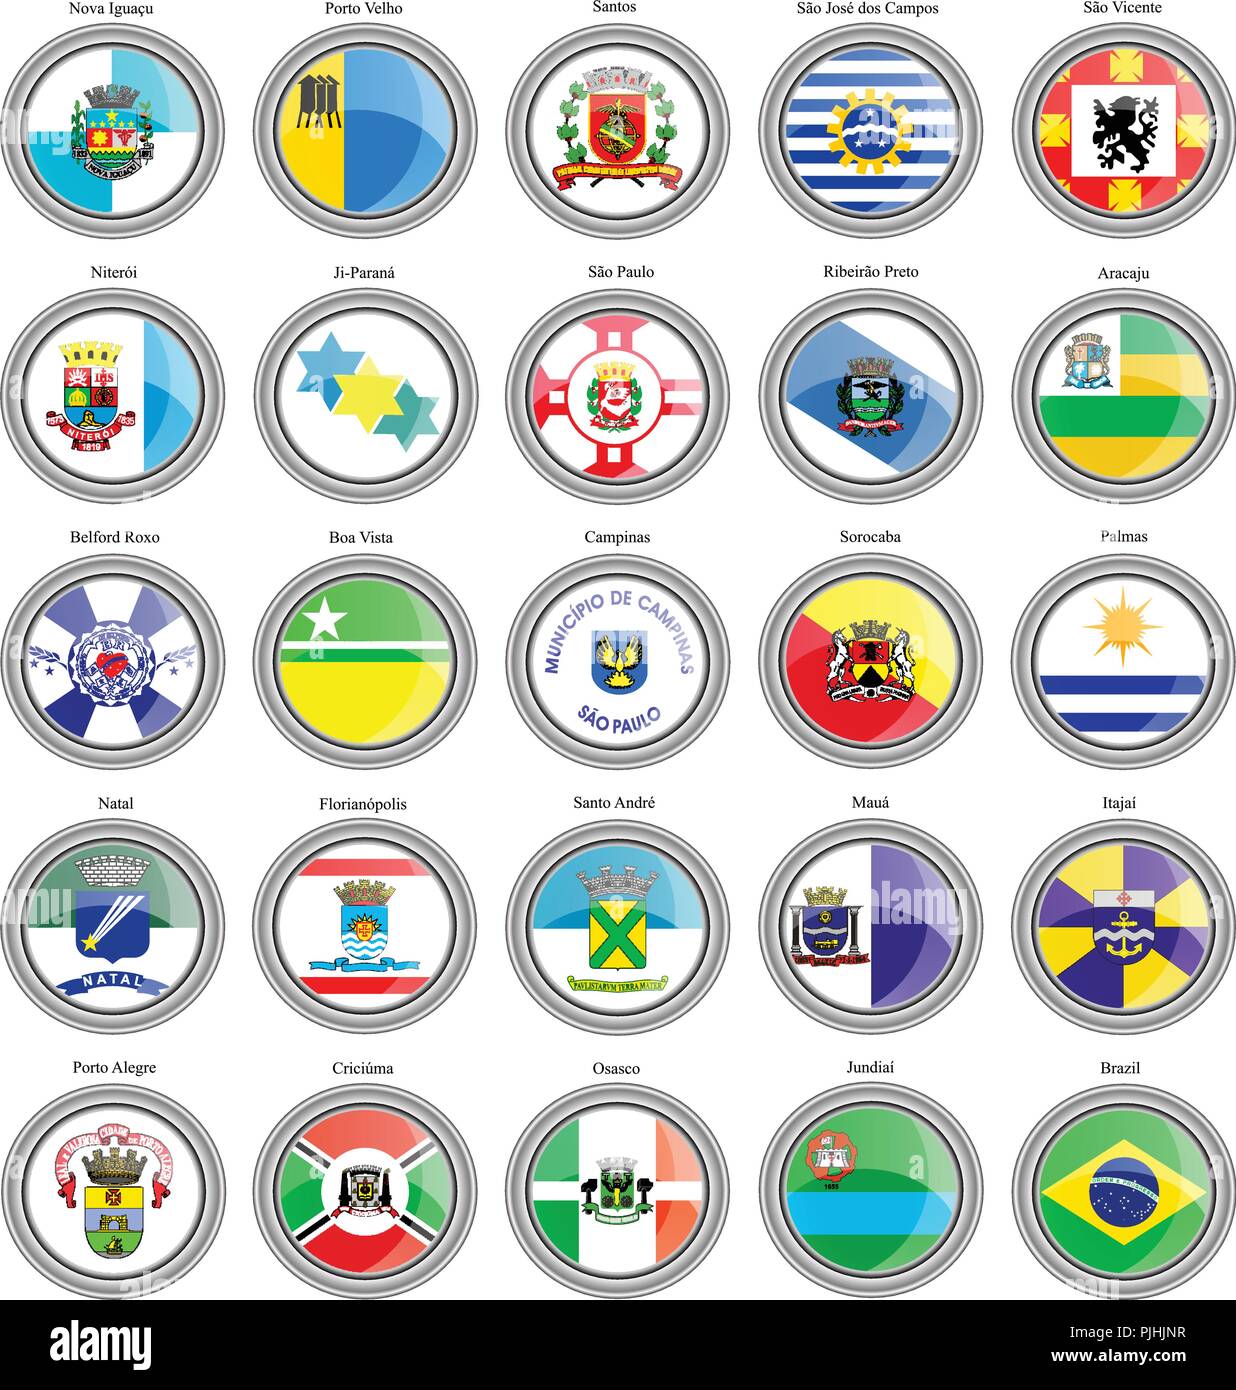 Set of icons. Flags of the Brazilian cities. Stock Vector